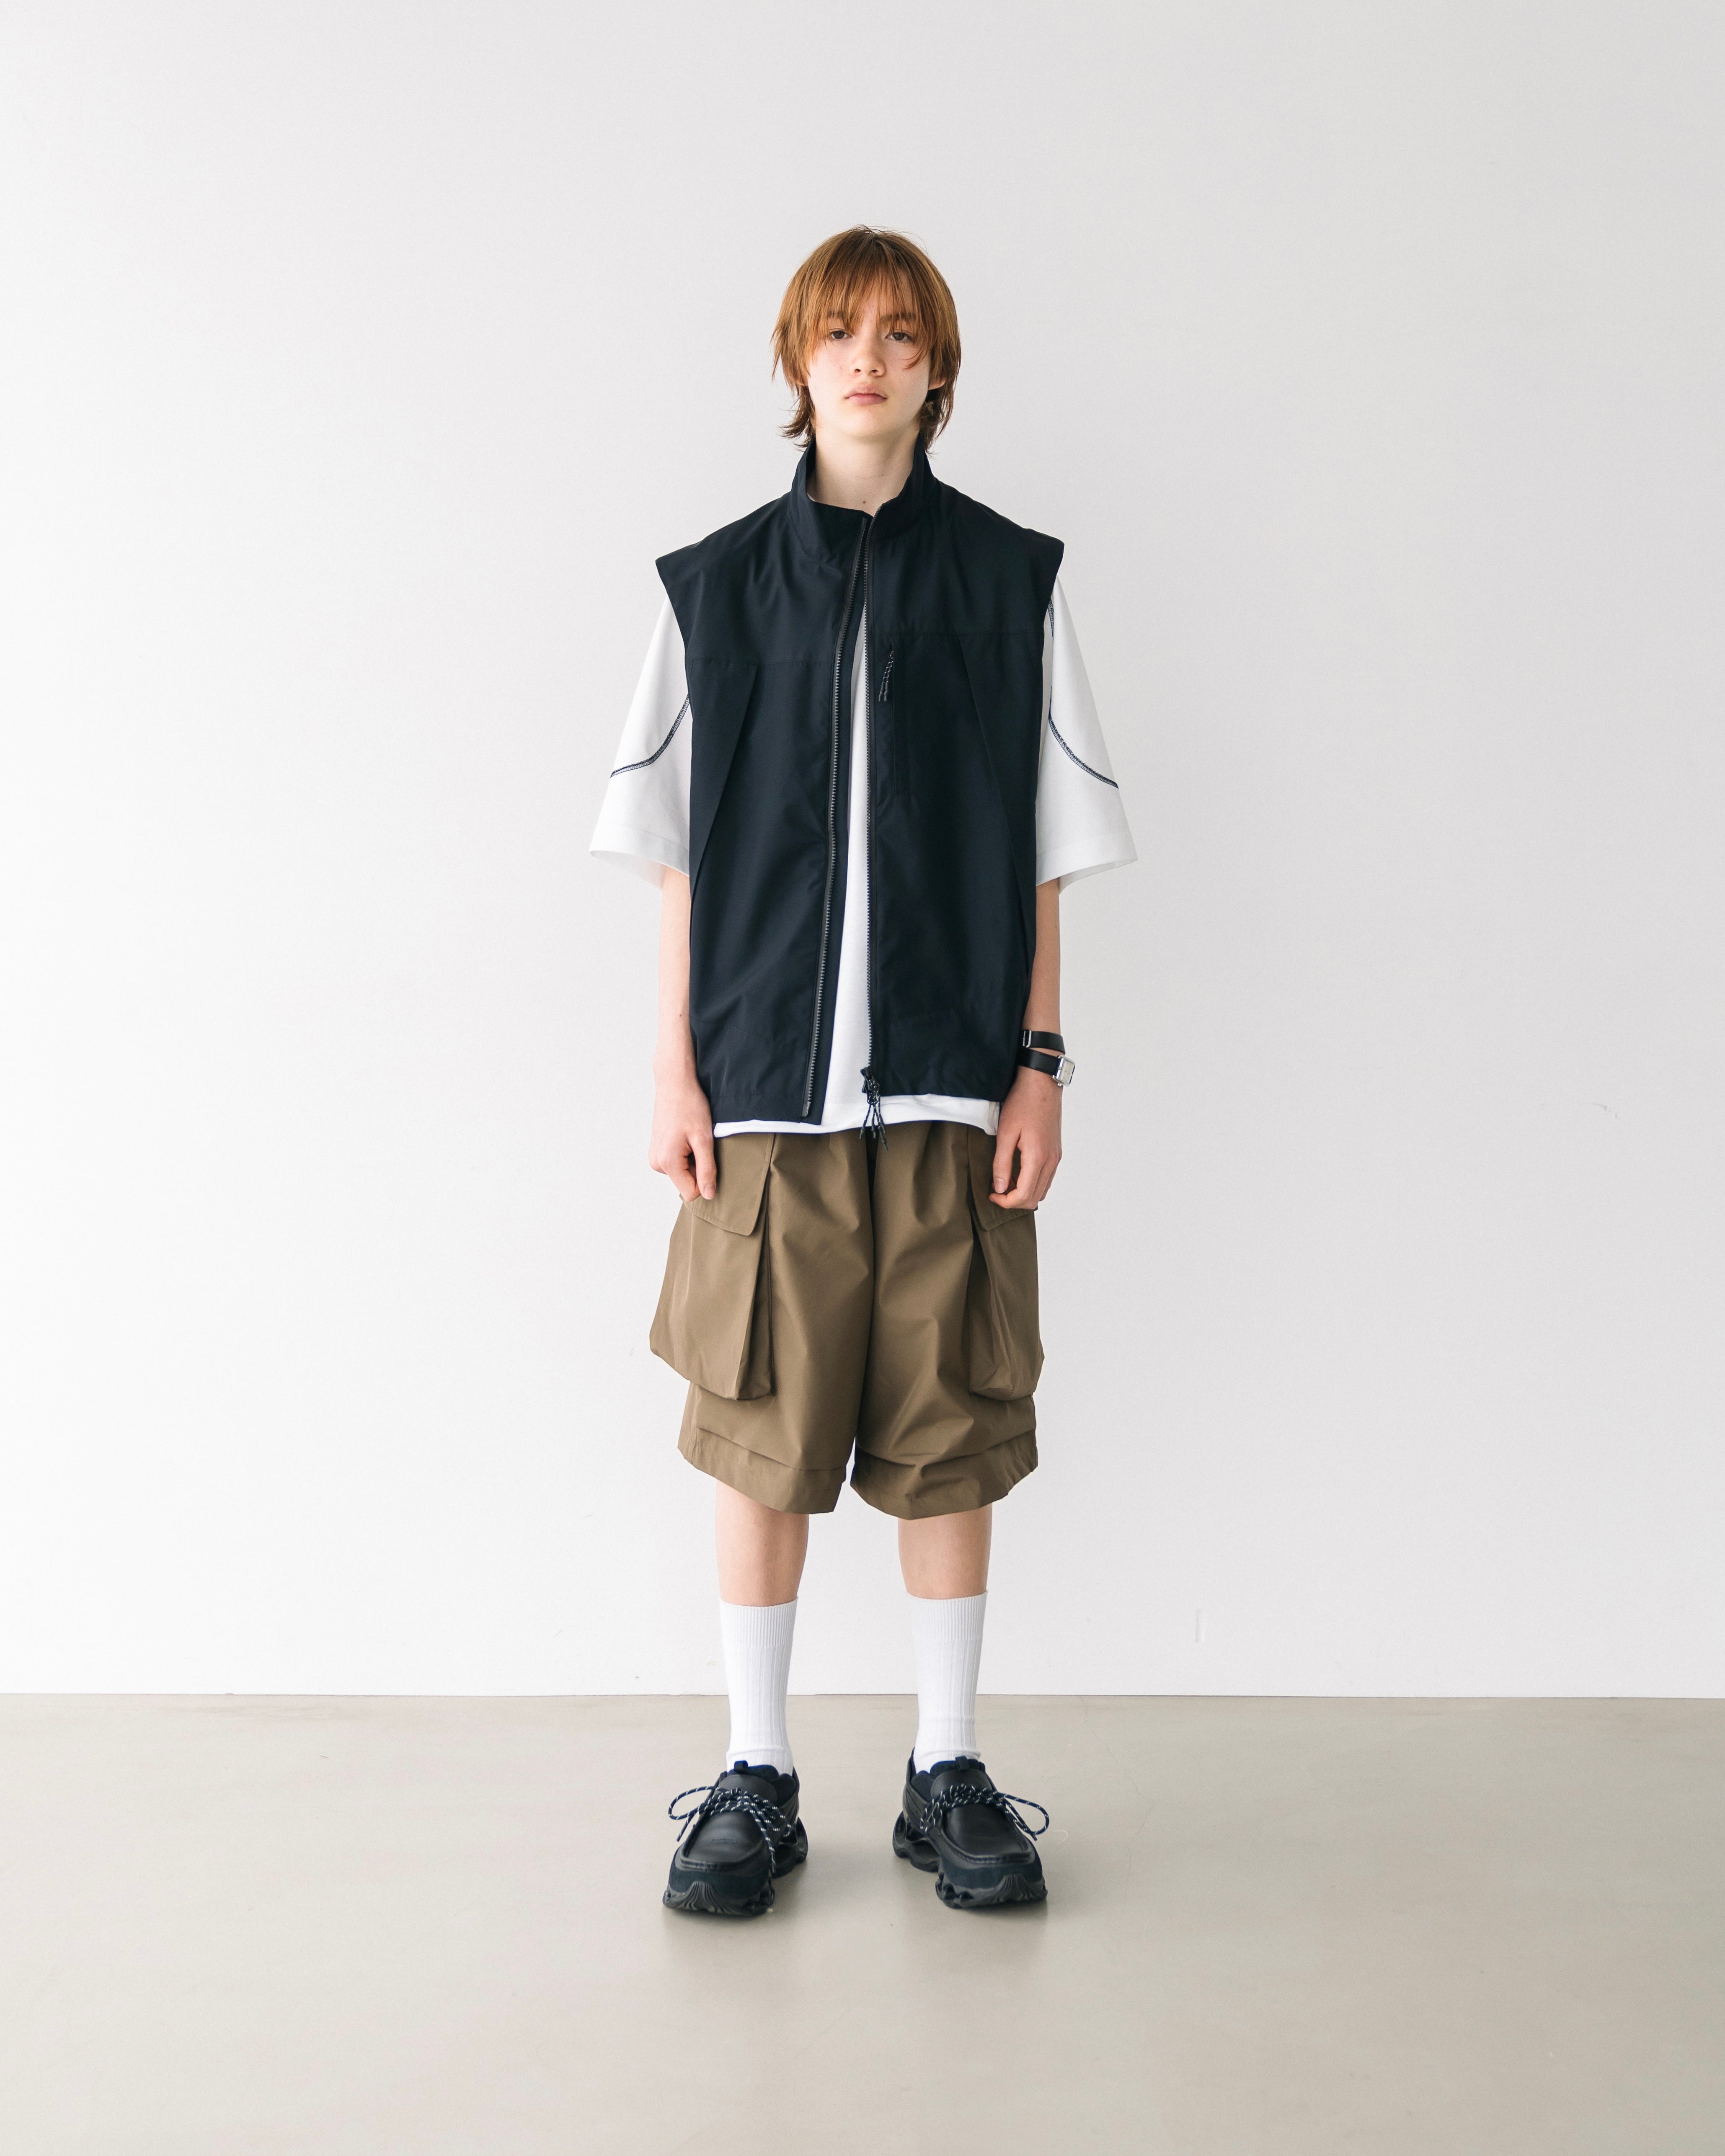 【5.1 WED 20:00- In stock】+phenix WINDSTOPPER® by GORE-TEX LABS CITY MILITARY HALF PANTS